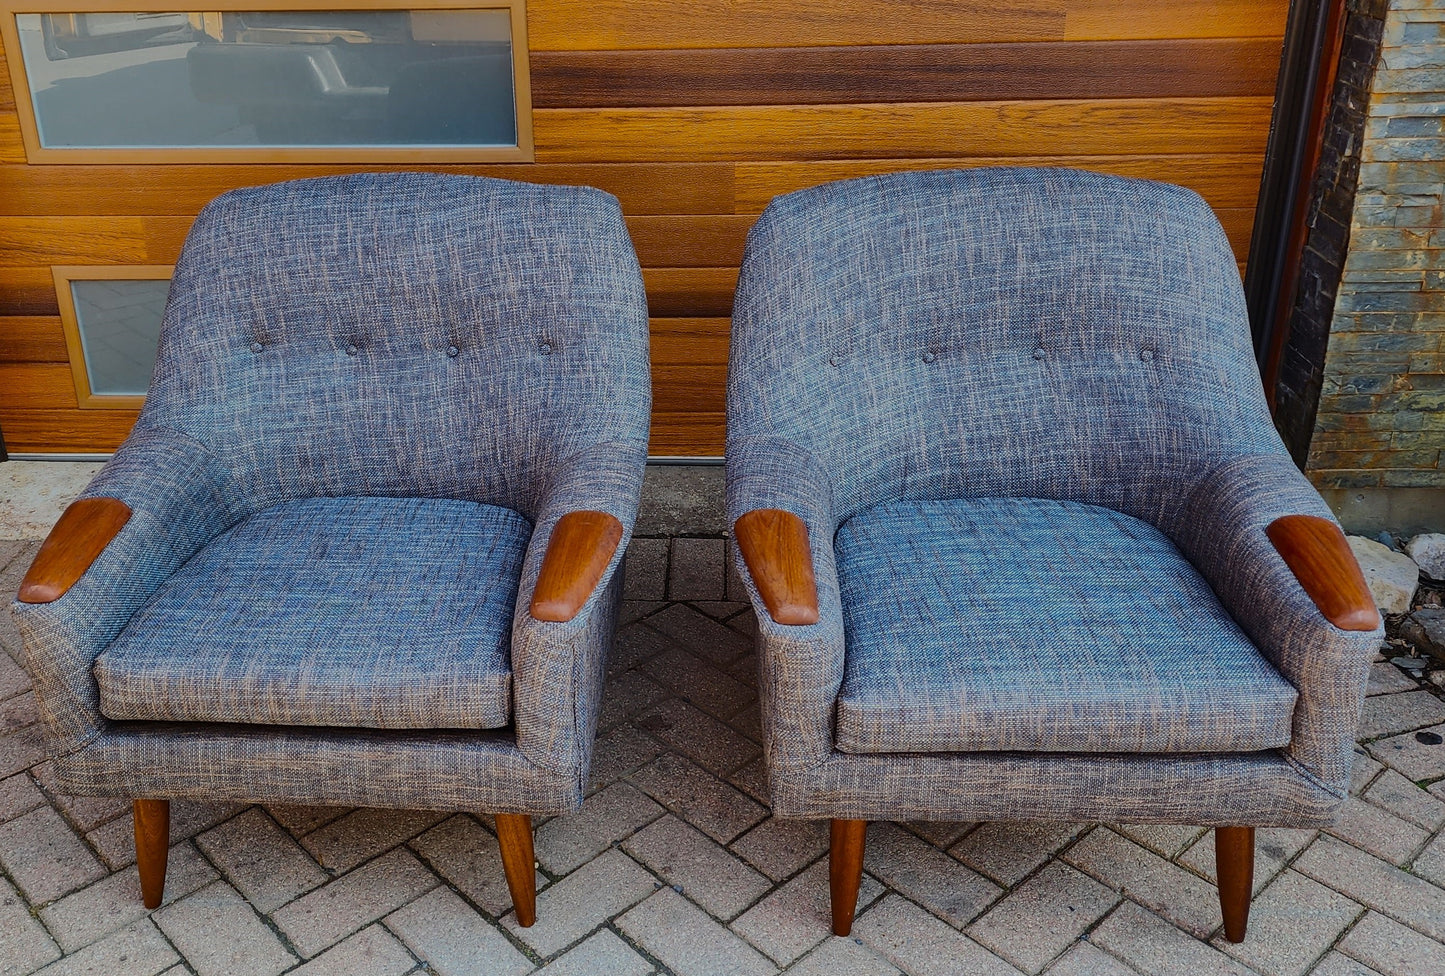 REFINISHED REUPHOLSTERED Danish Mid Century Modern Teak Lounge Chairs, set of 2